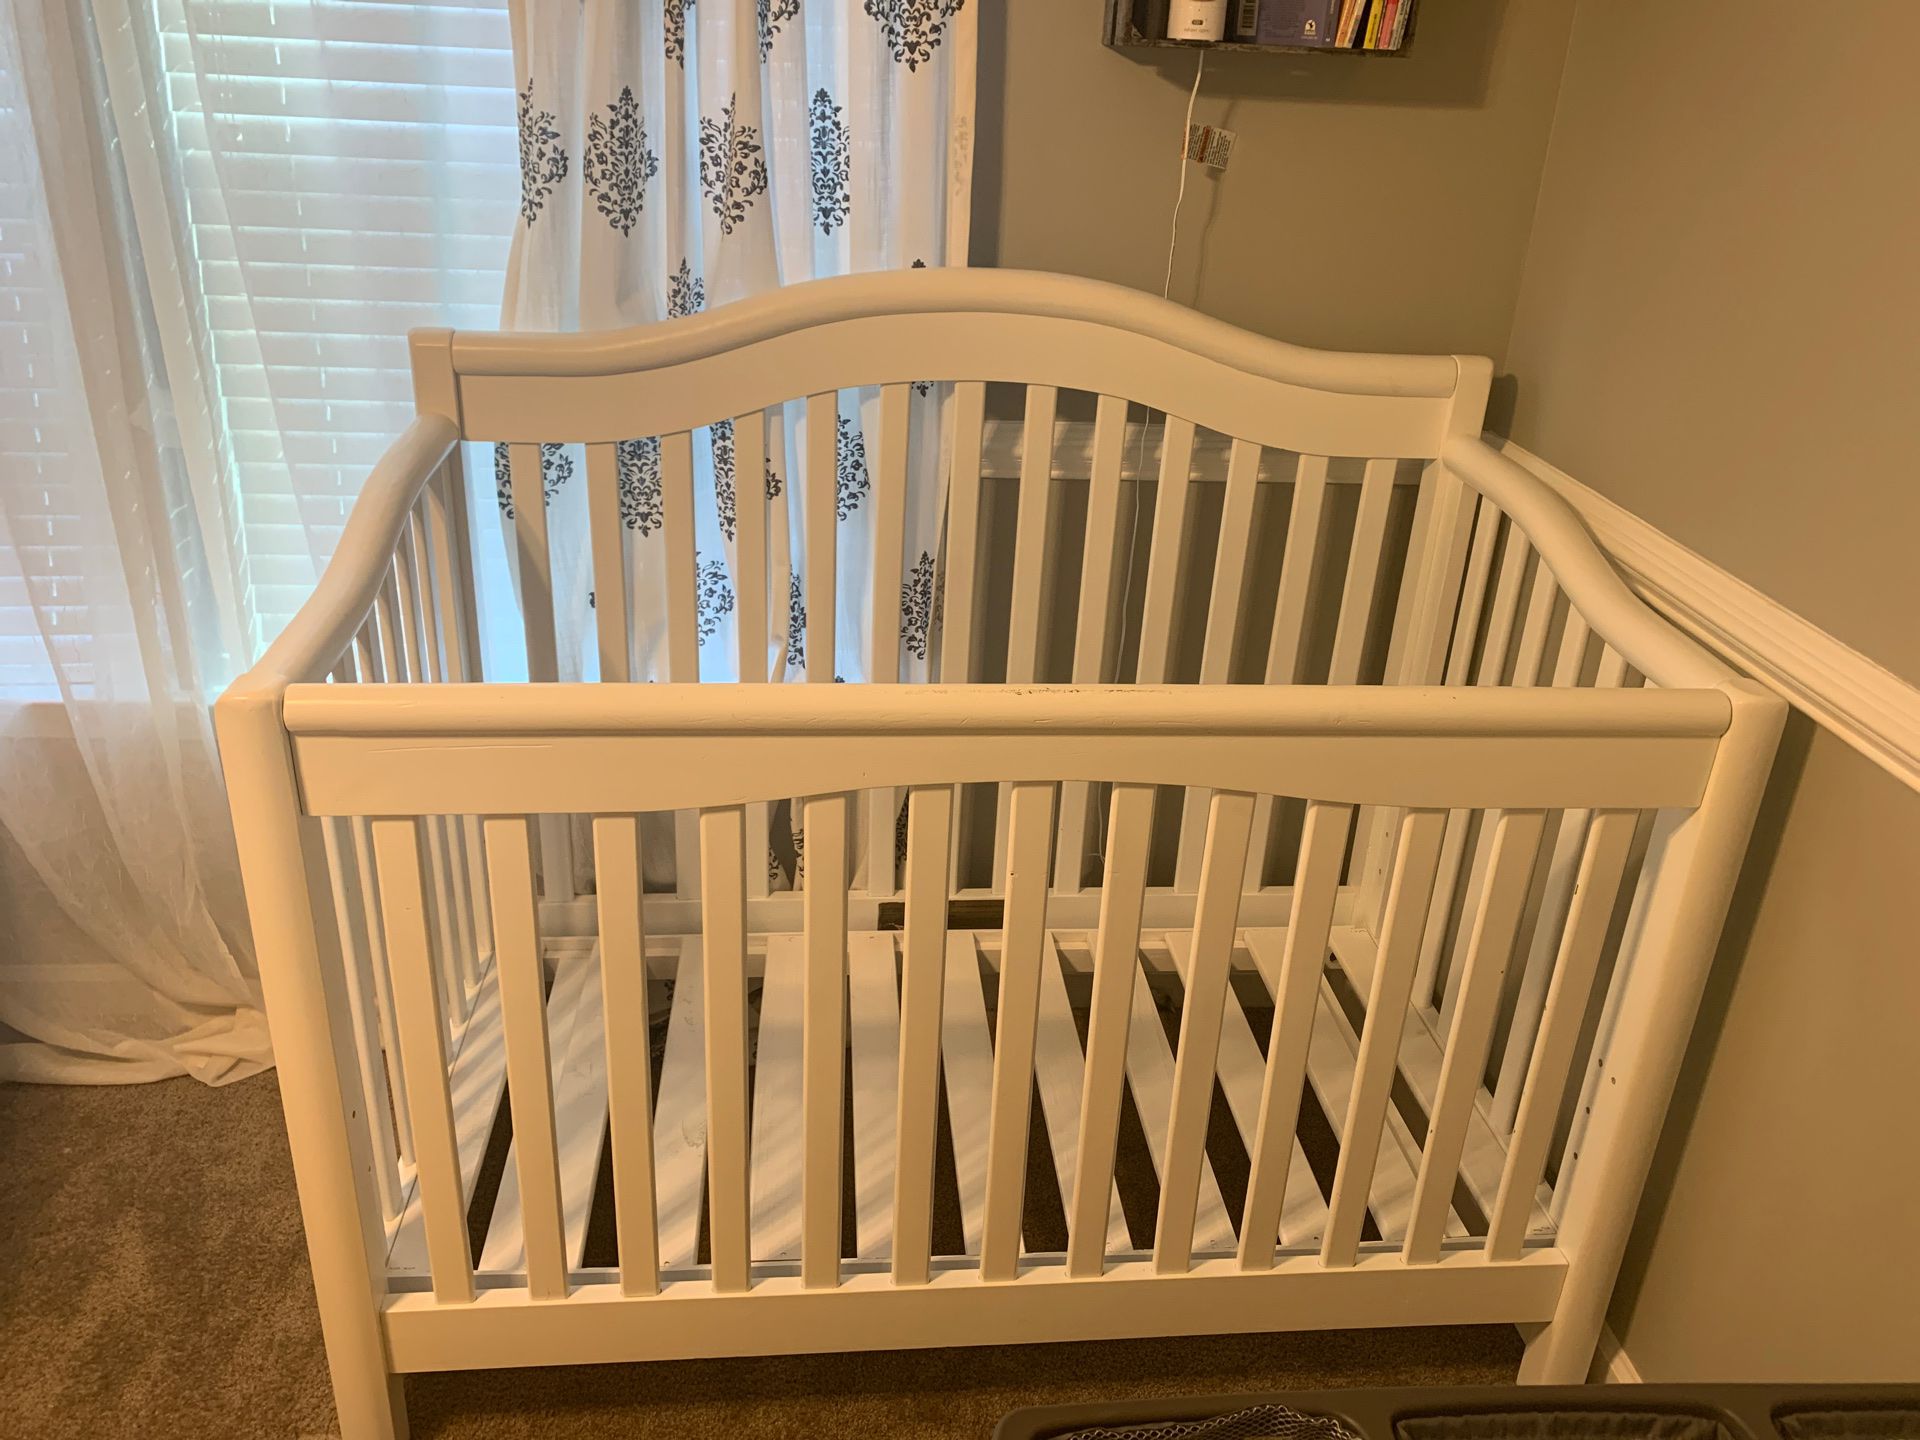 Crib, playpen, photos,bassinet, changing table and crib bedding set for sale